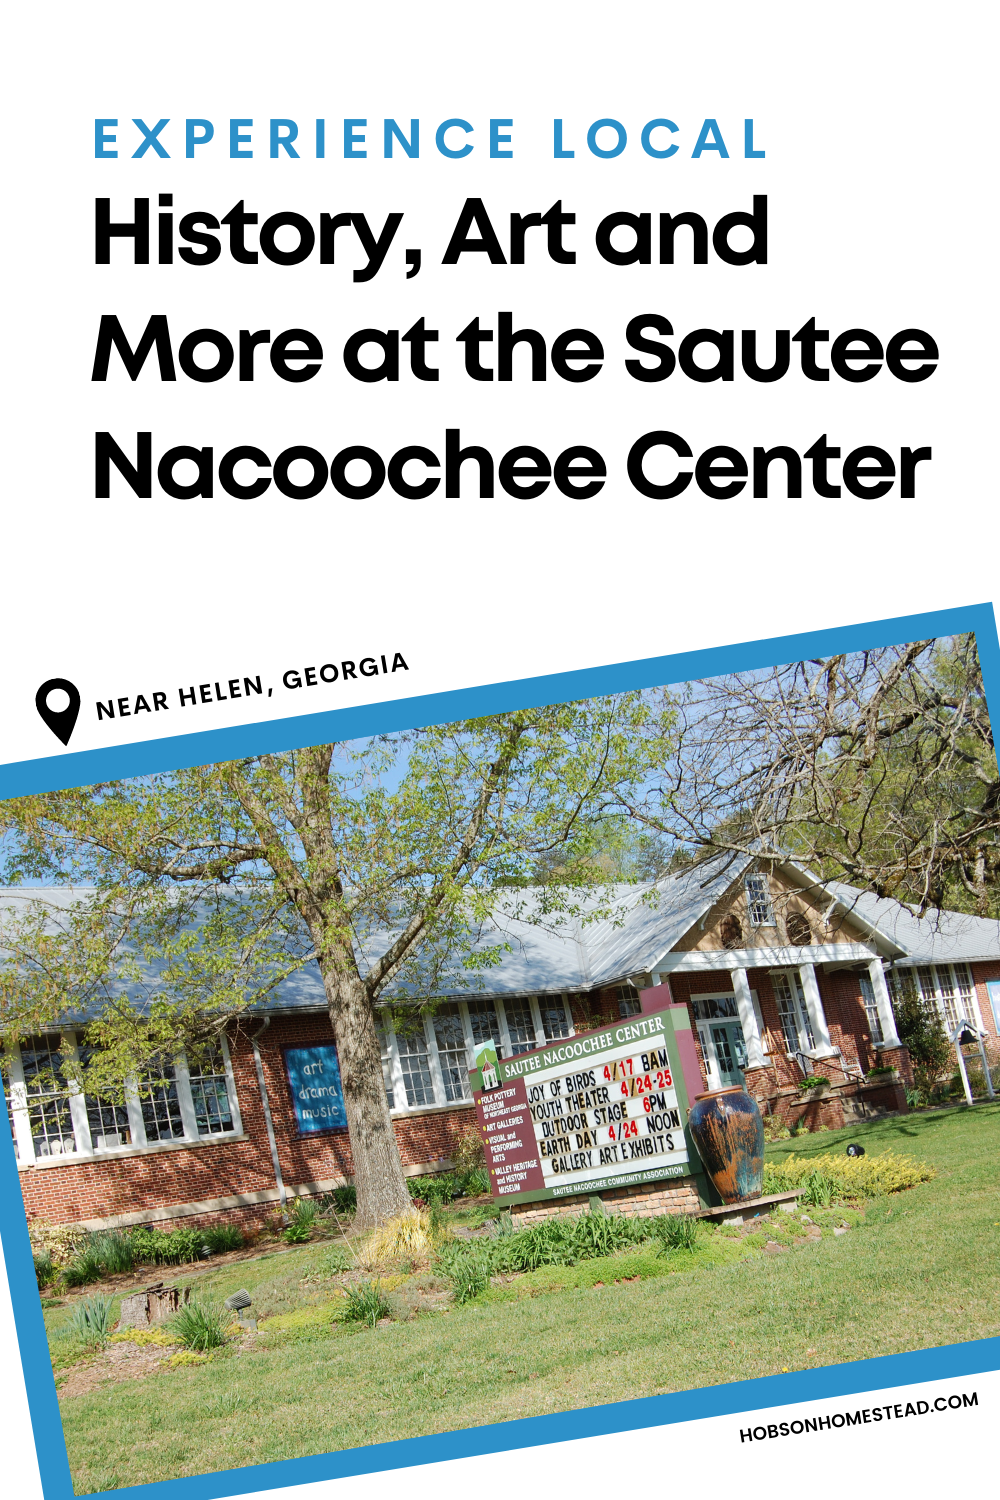 Love Helen? Experience Local History, Art and More at the Sautee Nacoochee Center